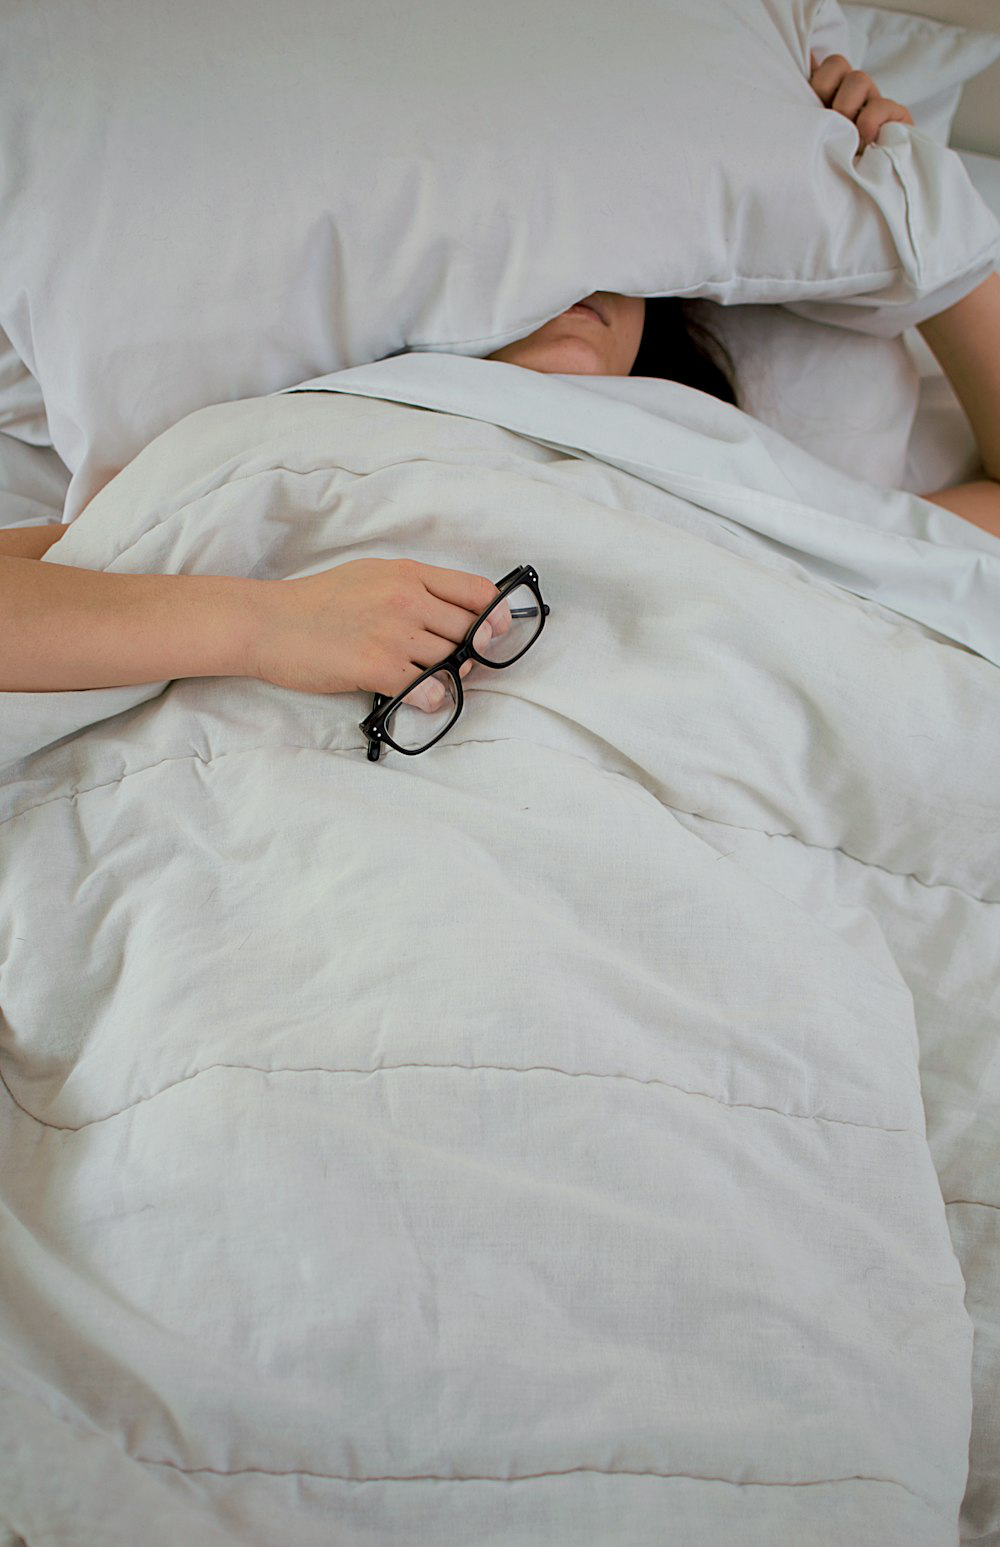 person sleeping in white sheets.